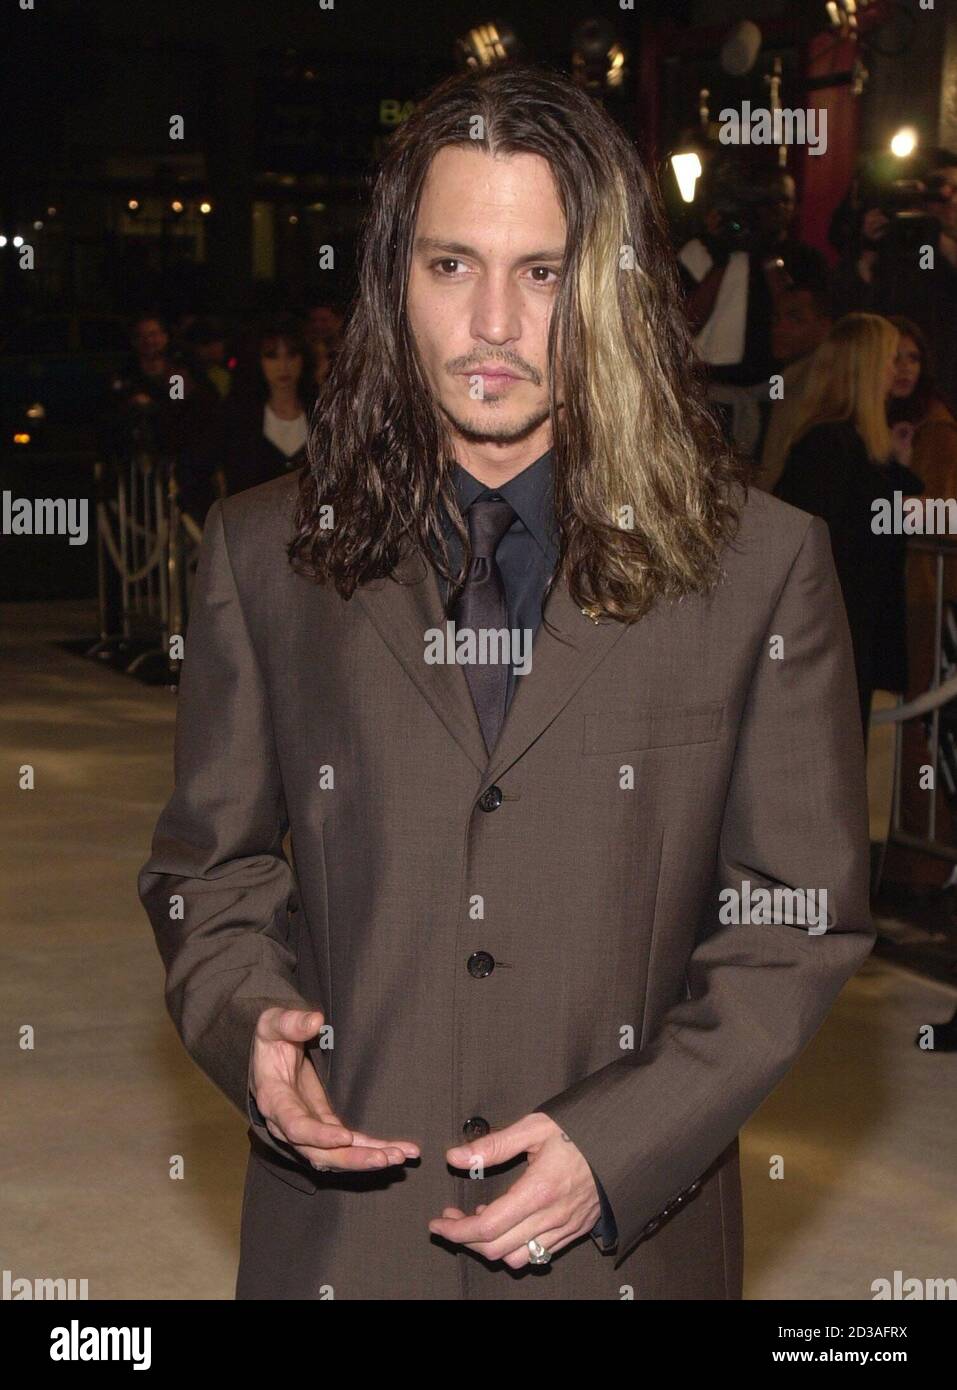 Actor Johnny Depp Arrives At Mann S Chinese Theater In Hollywood March 29 01 For The Premiere Of His New Film Blow The Movie Is About The Rise And Fall Of 1970 S Drug